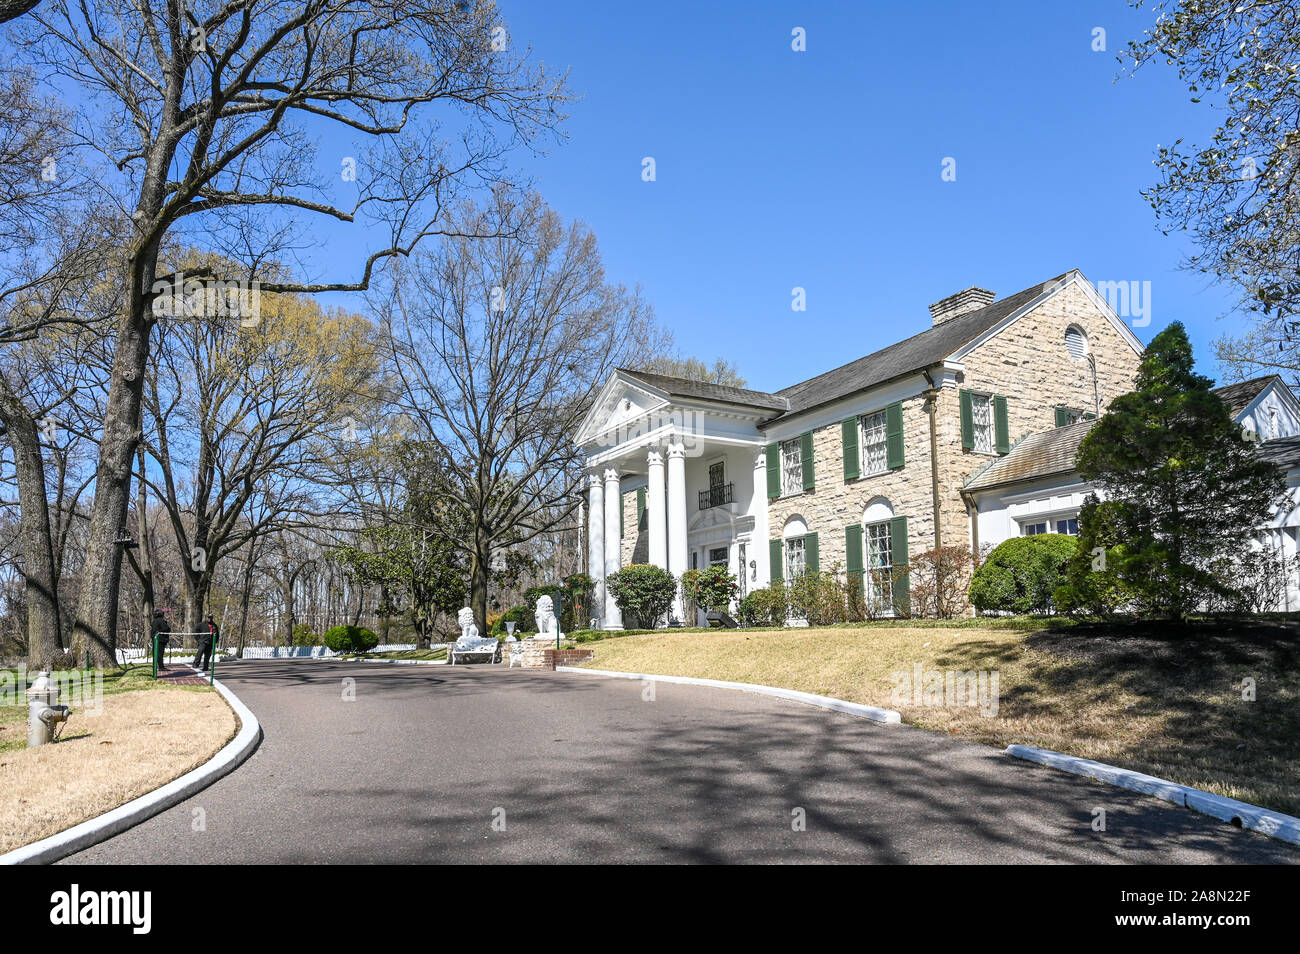 Graceland in Memphis. The mansion was  built in 1939 but later bought by Elvis Presley who lived here from 1957 – 1977. Stock Photo